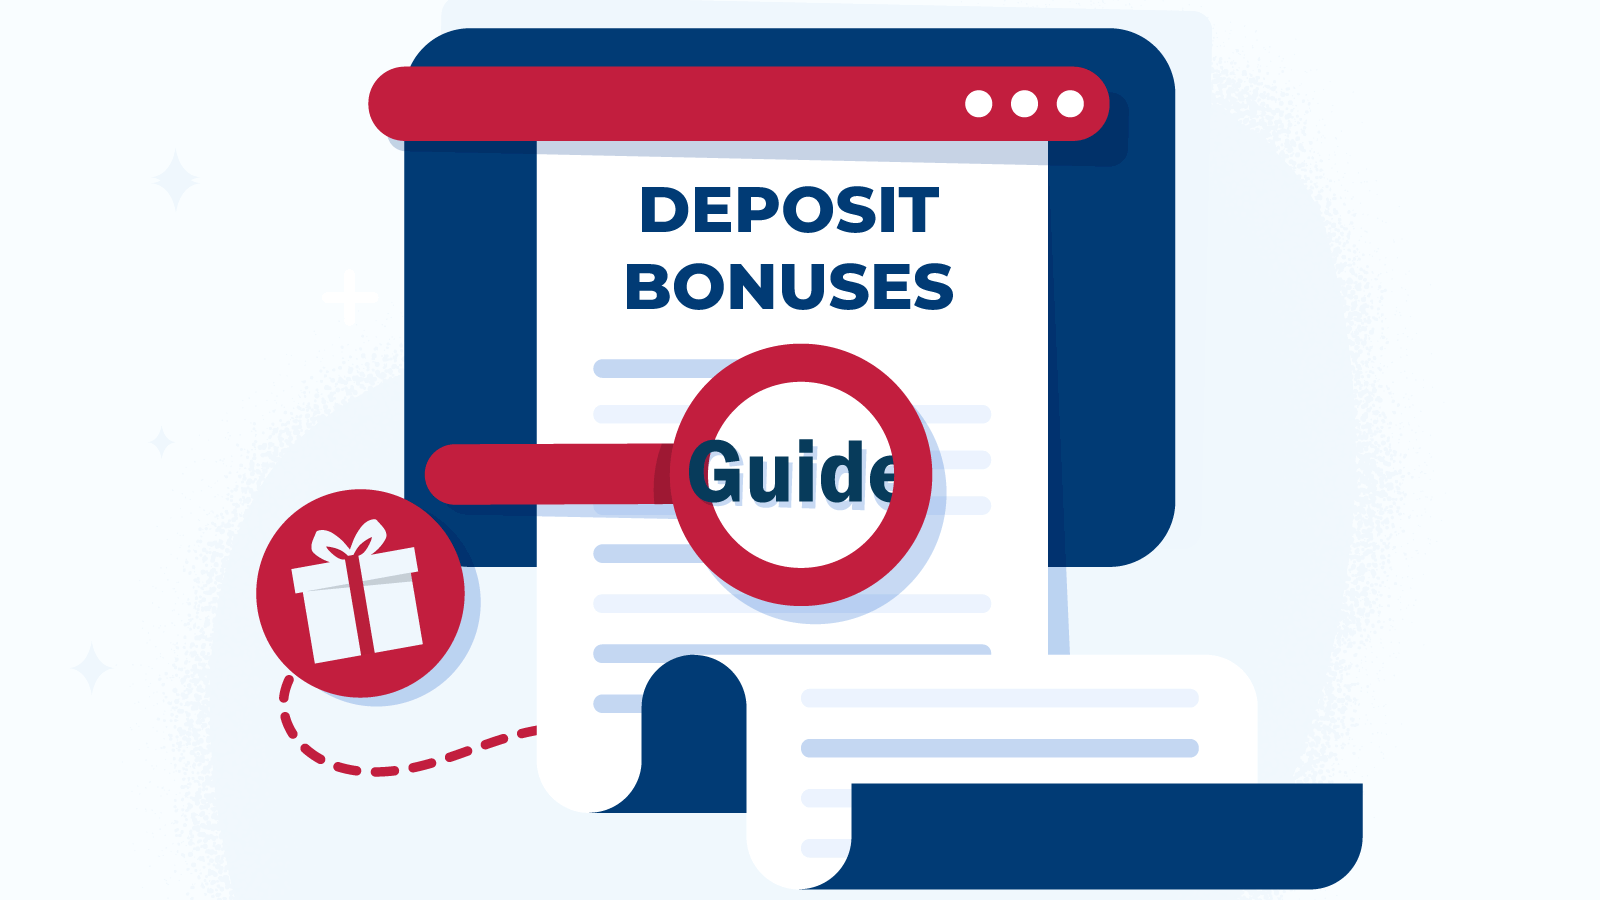 6.Step by step guide on how to claim the best deposit bonuses